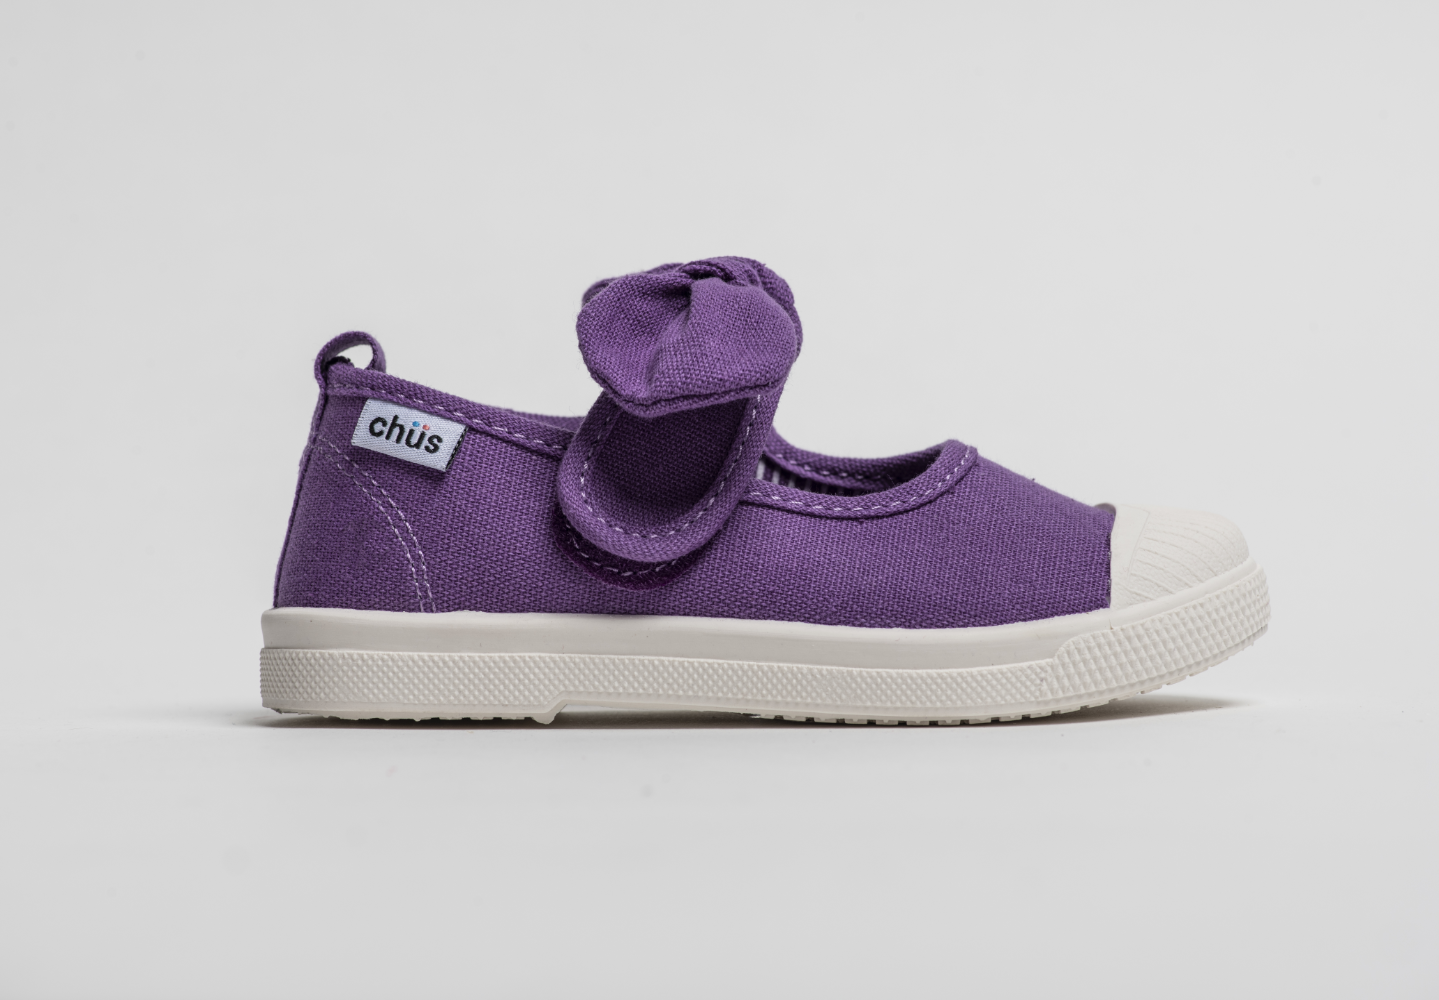 Canvas sneakers with single velcro strap and removable bow tie in purple. Adorable monogrammed. Chus Shoes.